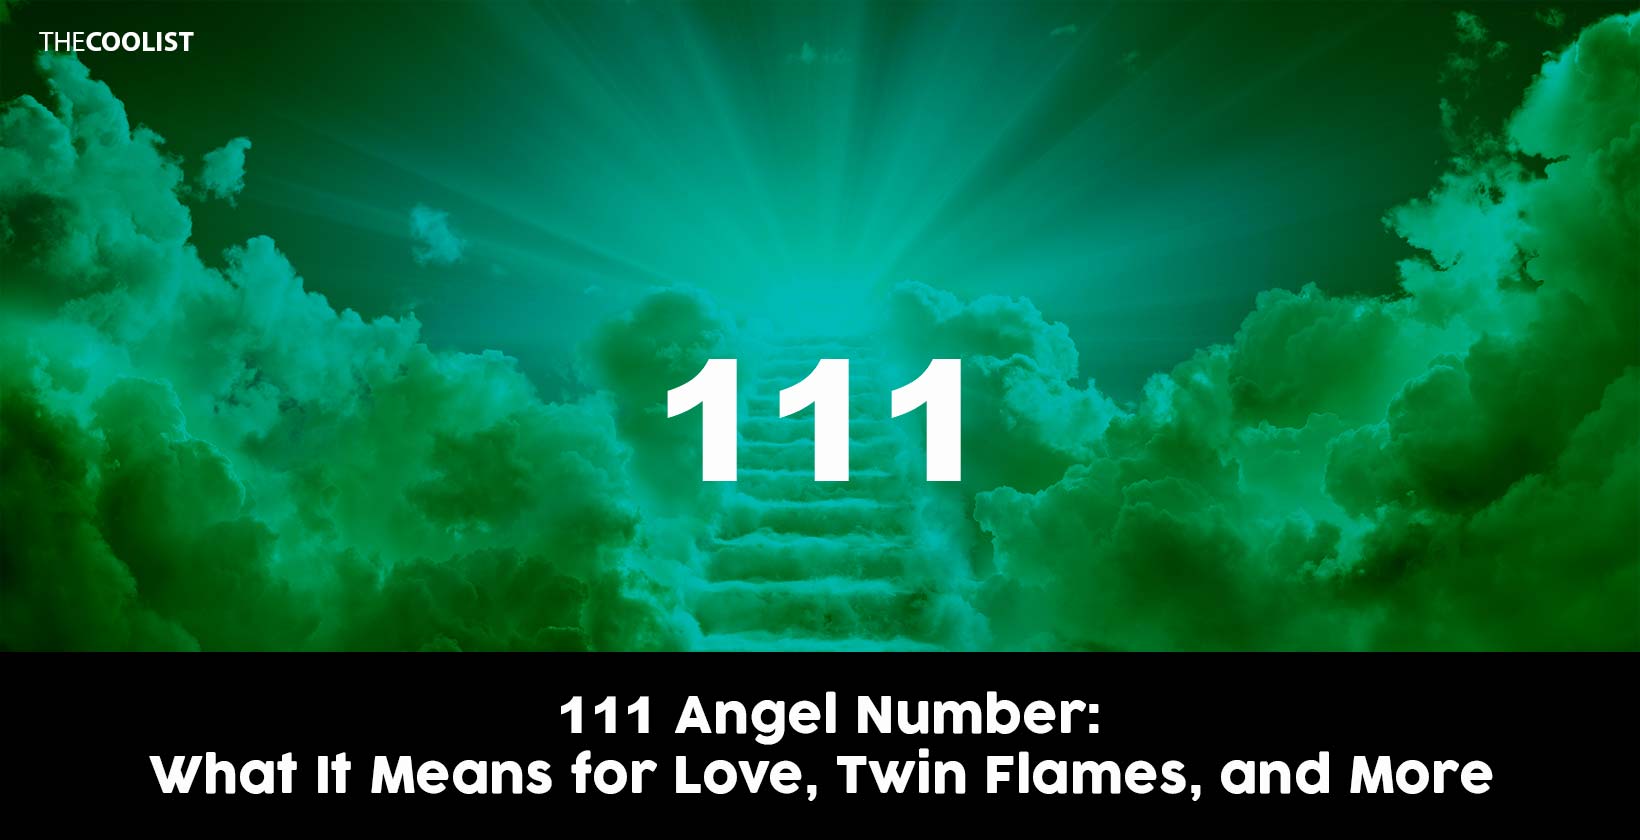 Here's What Seeing 111 Angel Number Means: 111 Meaning and Symbolism